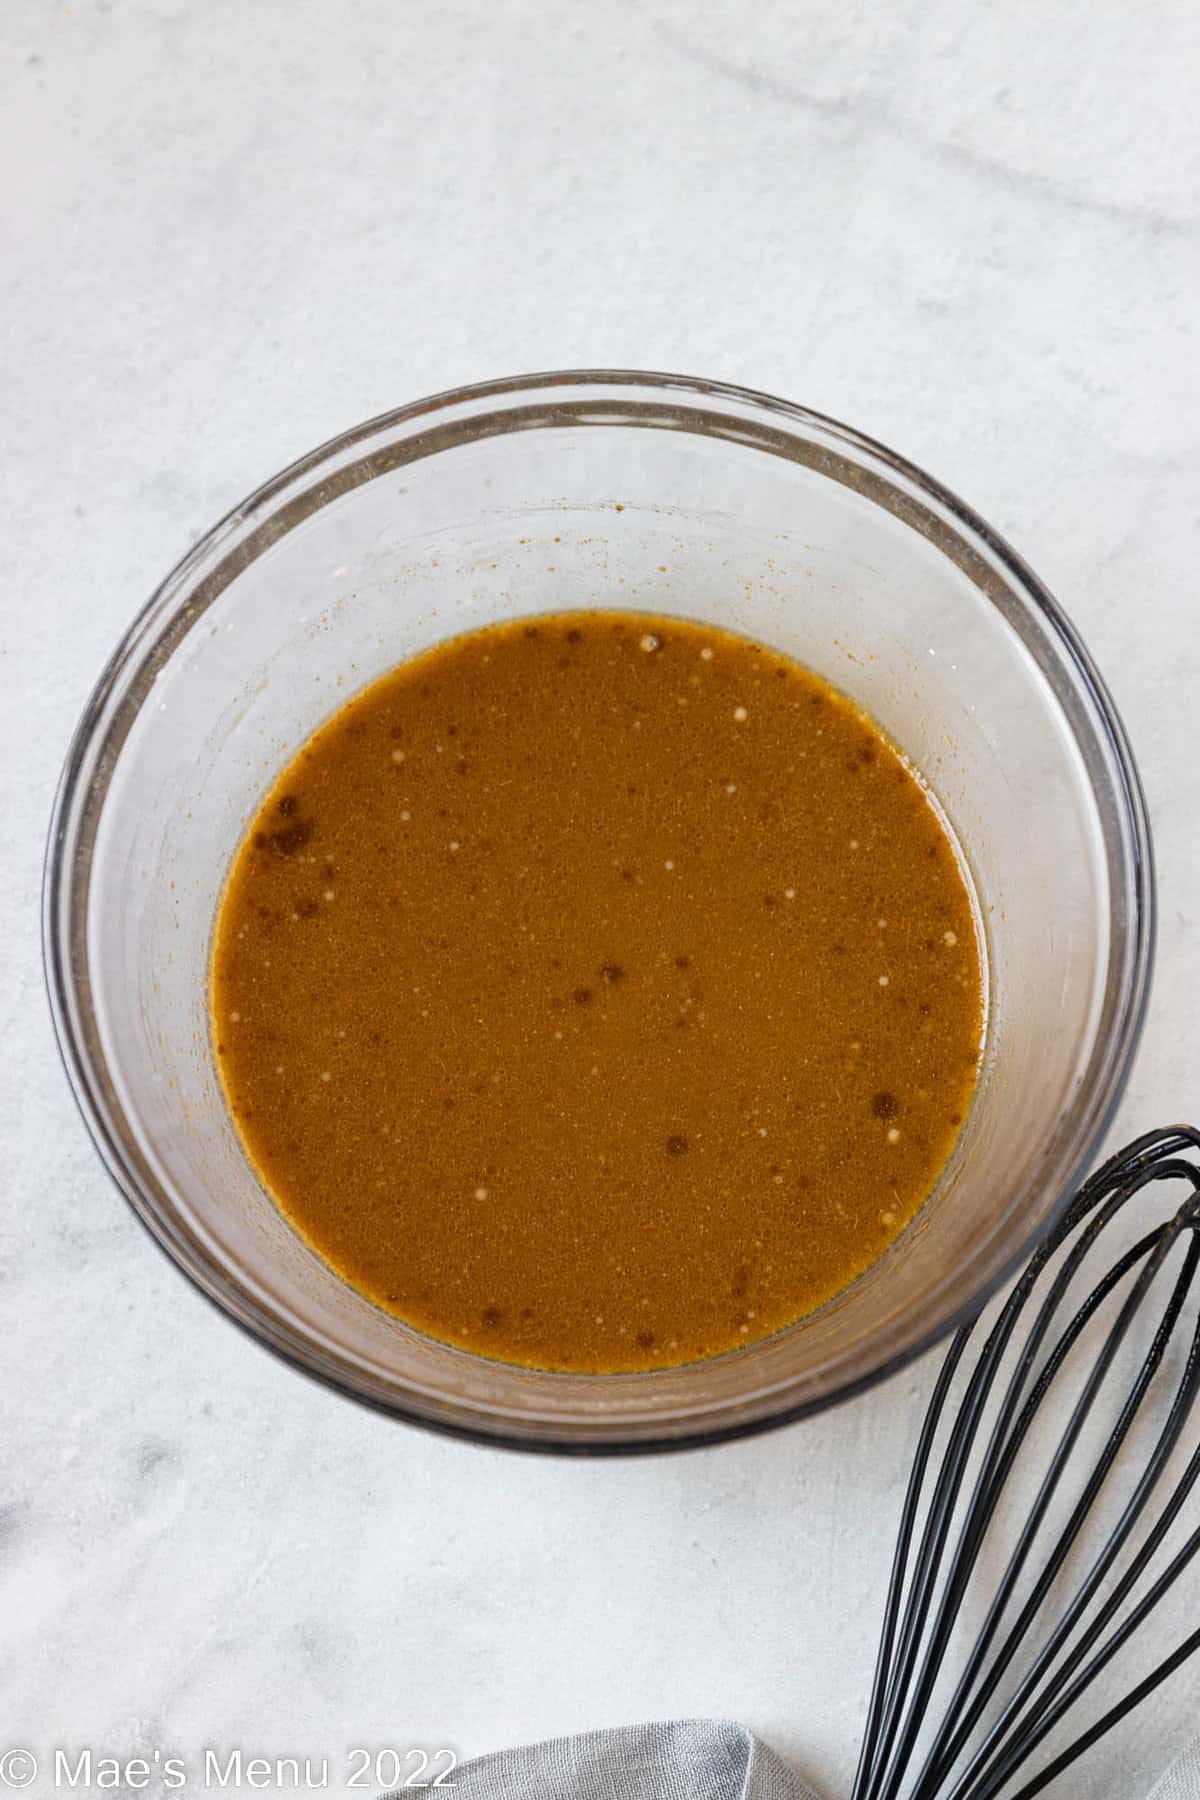 The orange stir fry sauce whisked up in a glass bowl.